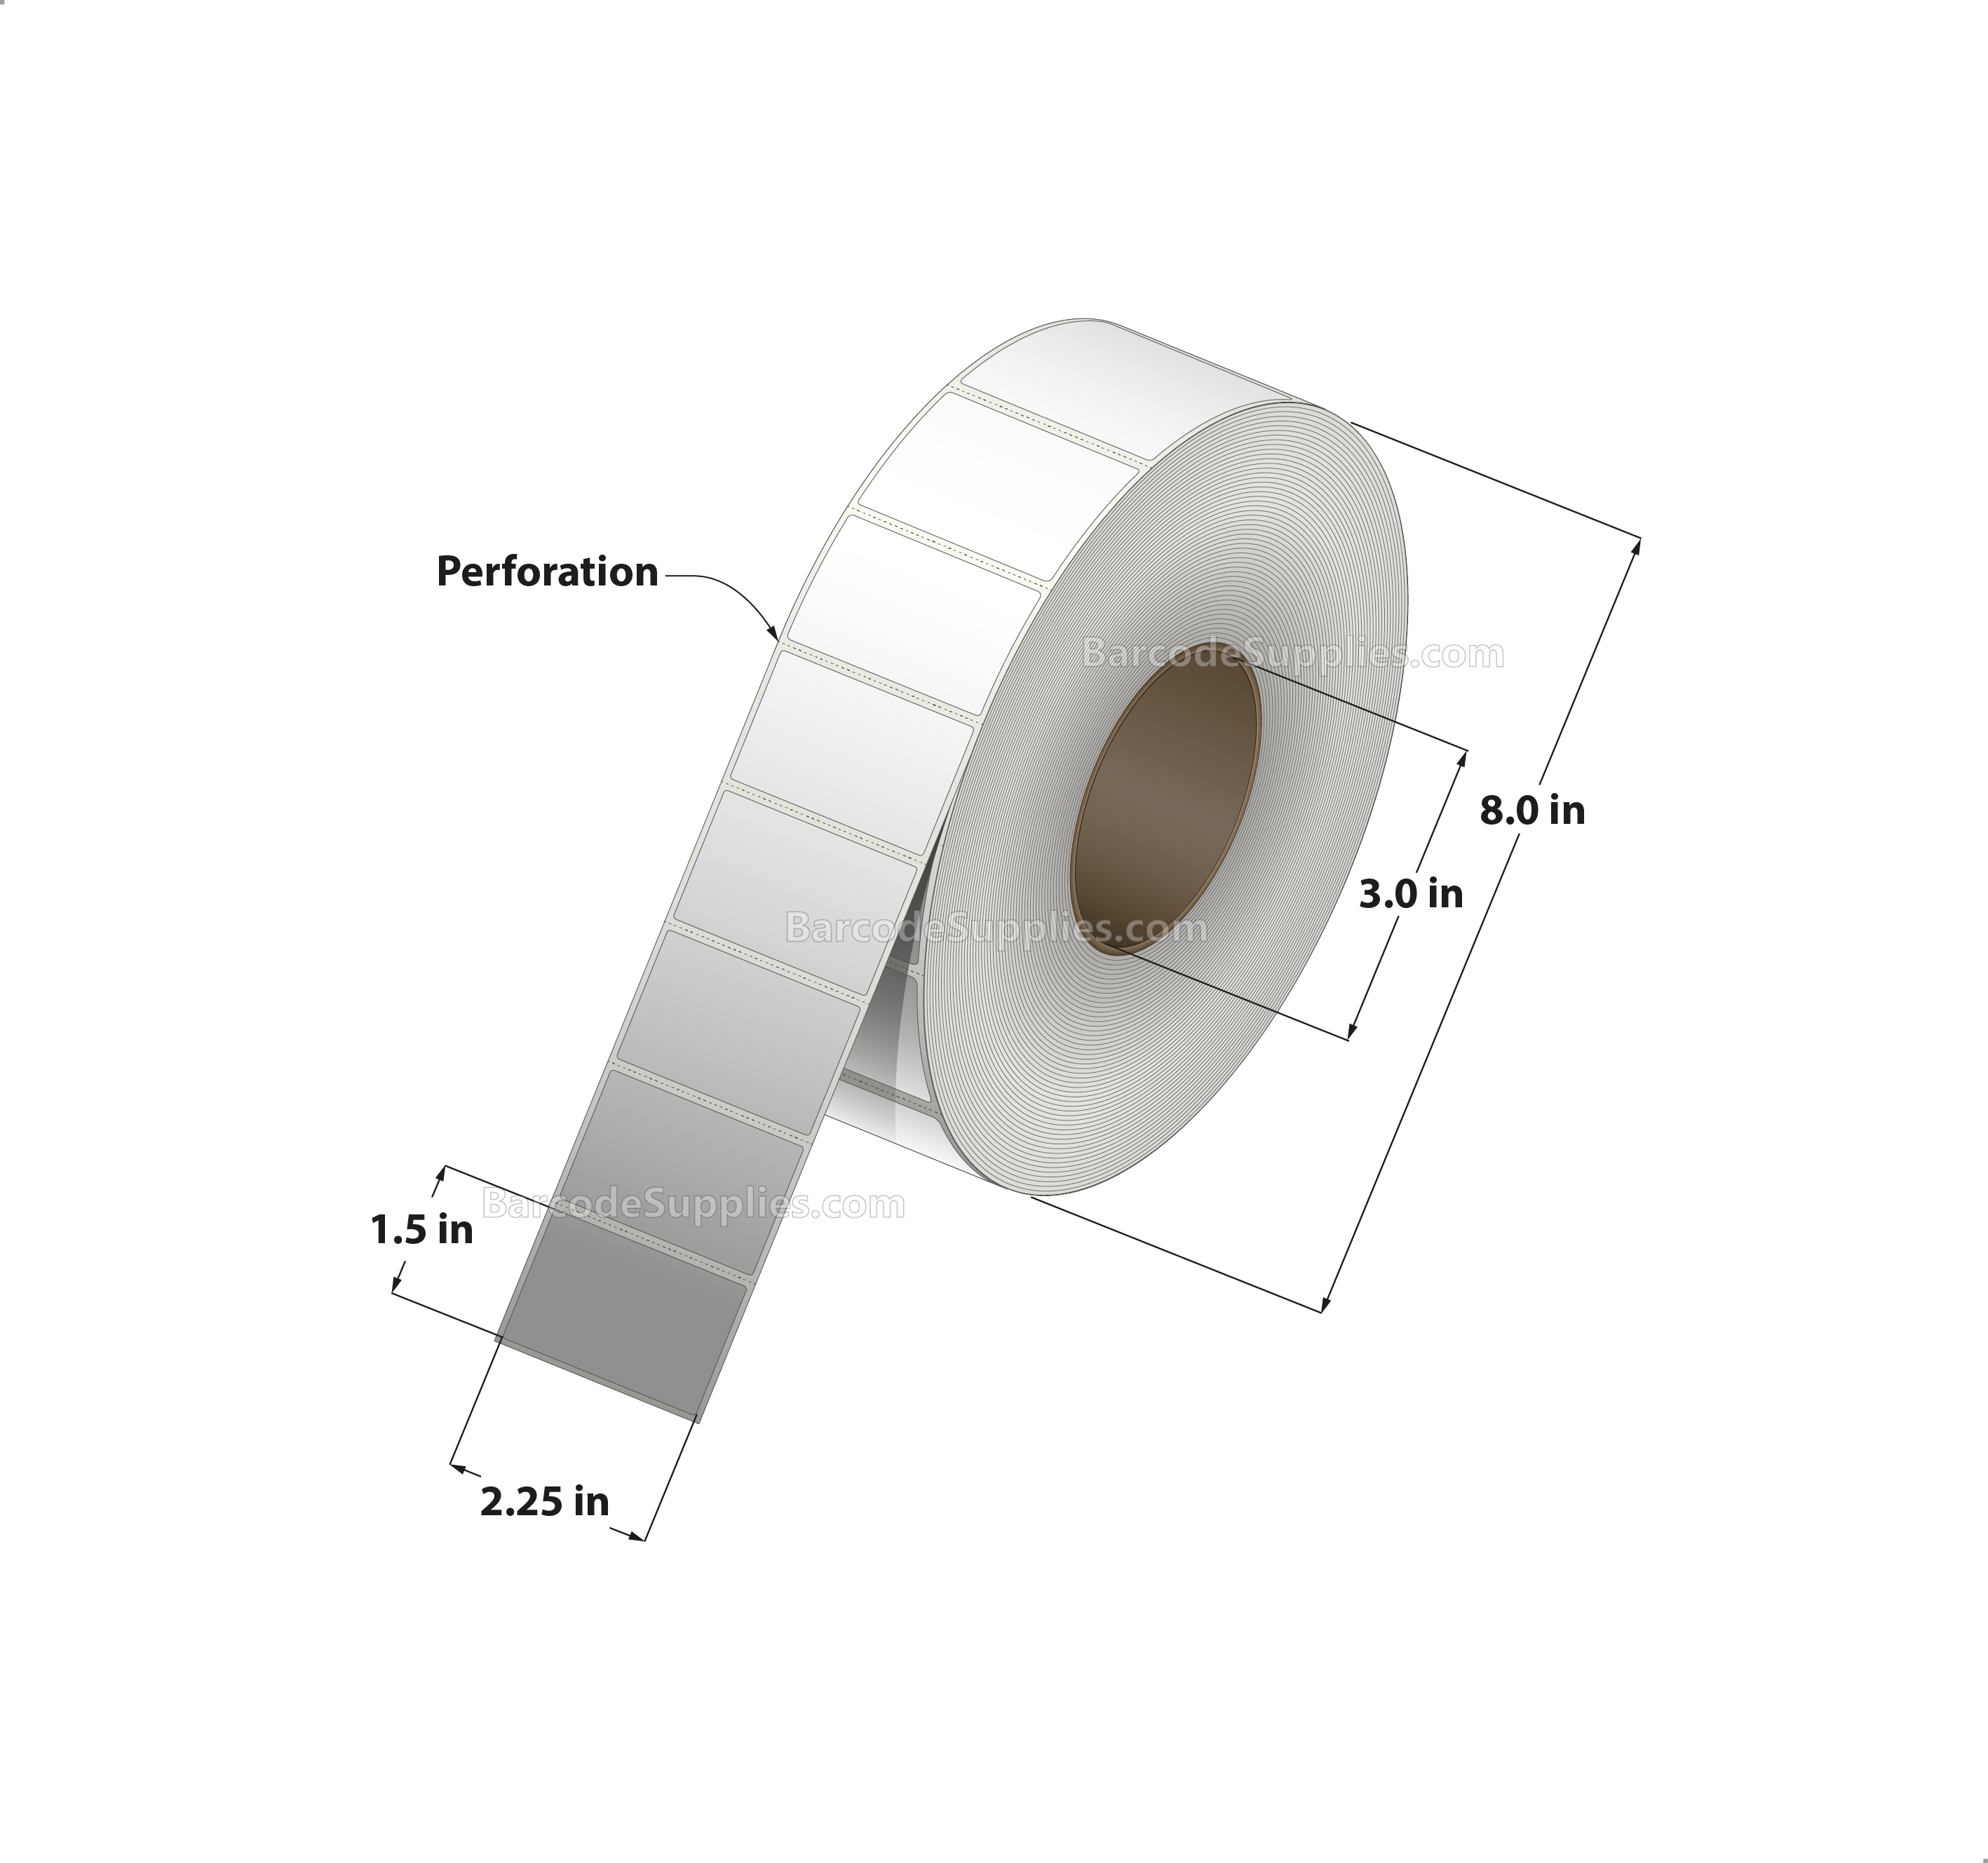 2.25 x 1.5 Thermal Transfer White Labels With Rubber Adhesive - Perforated - 4308 Labels Per Roll - Carton Of 4 Rolls - 17232 Labels Total - MPN: CTT225150-3P